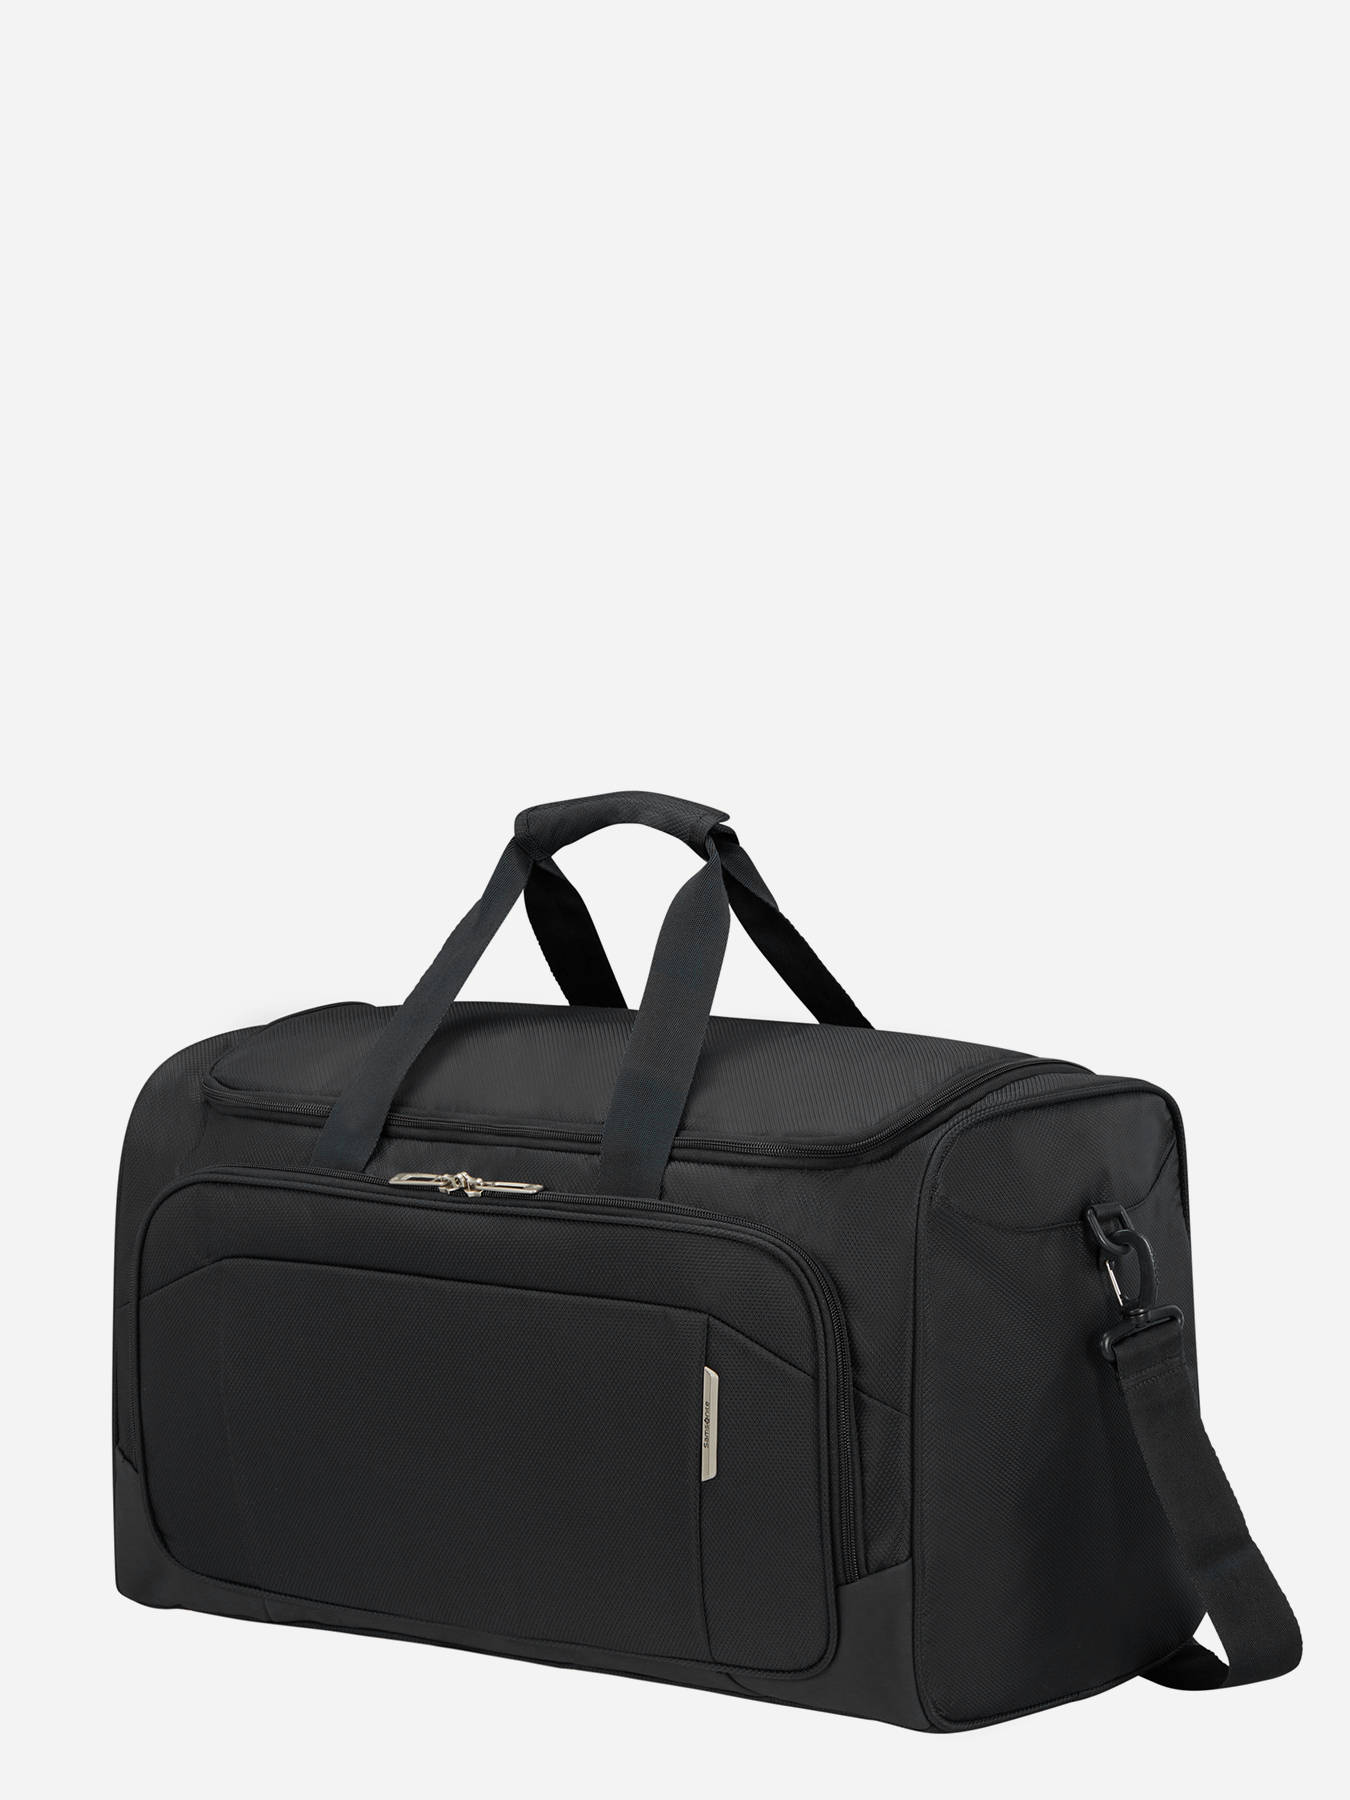 Samsonite Outlab Paradiver Duffle With Wheels 67